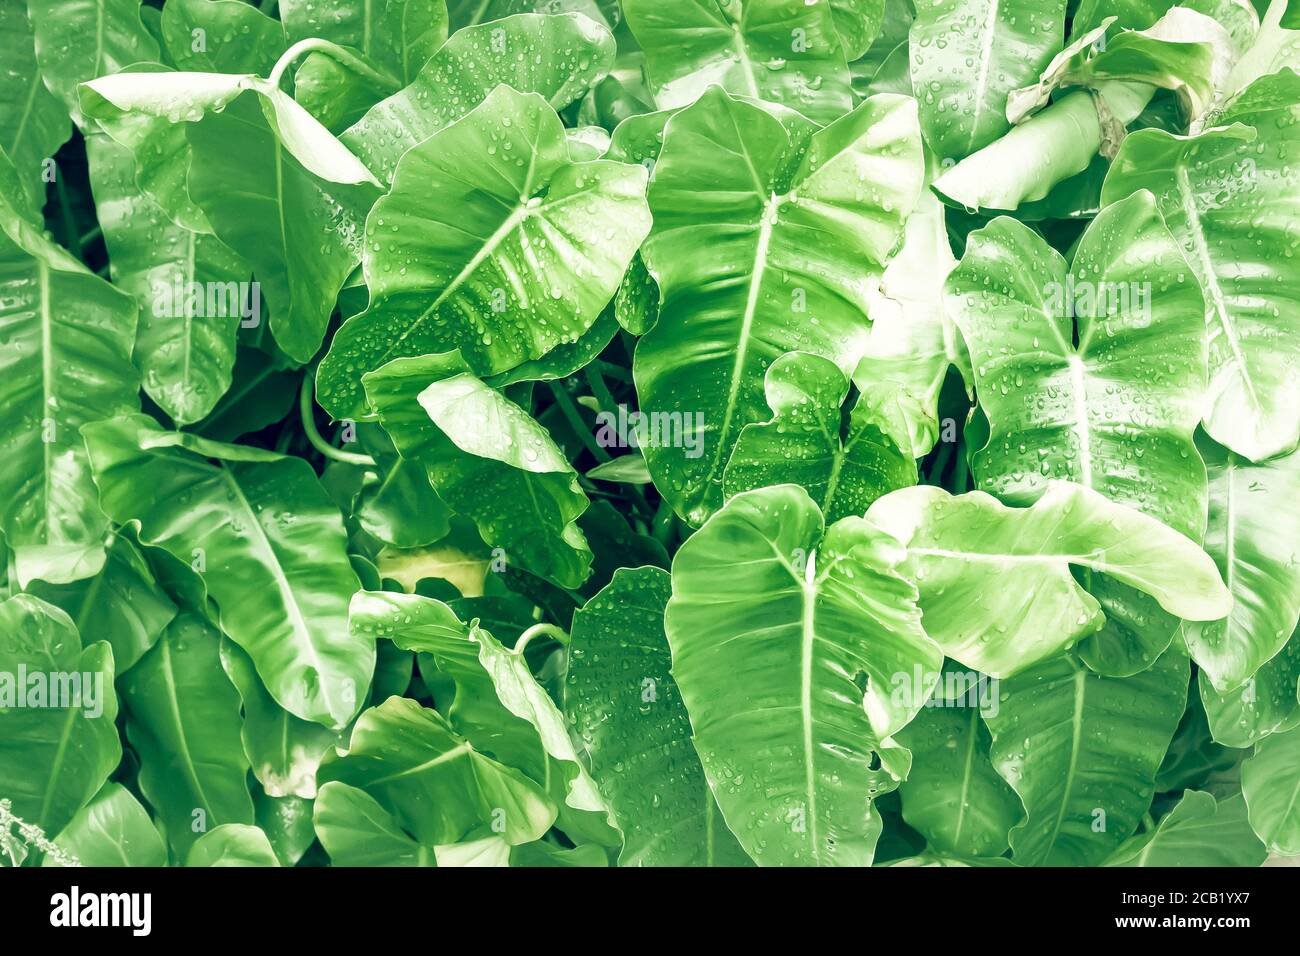 Philodendron leaf (Philodendron melinonii), large green foliage. Natural hart shape leaf tree. Stock Photo